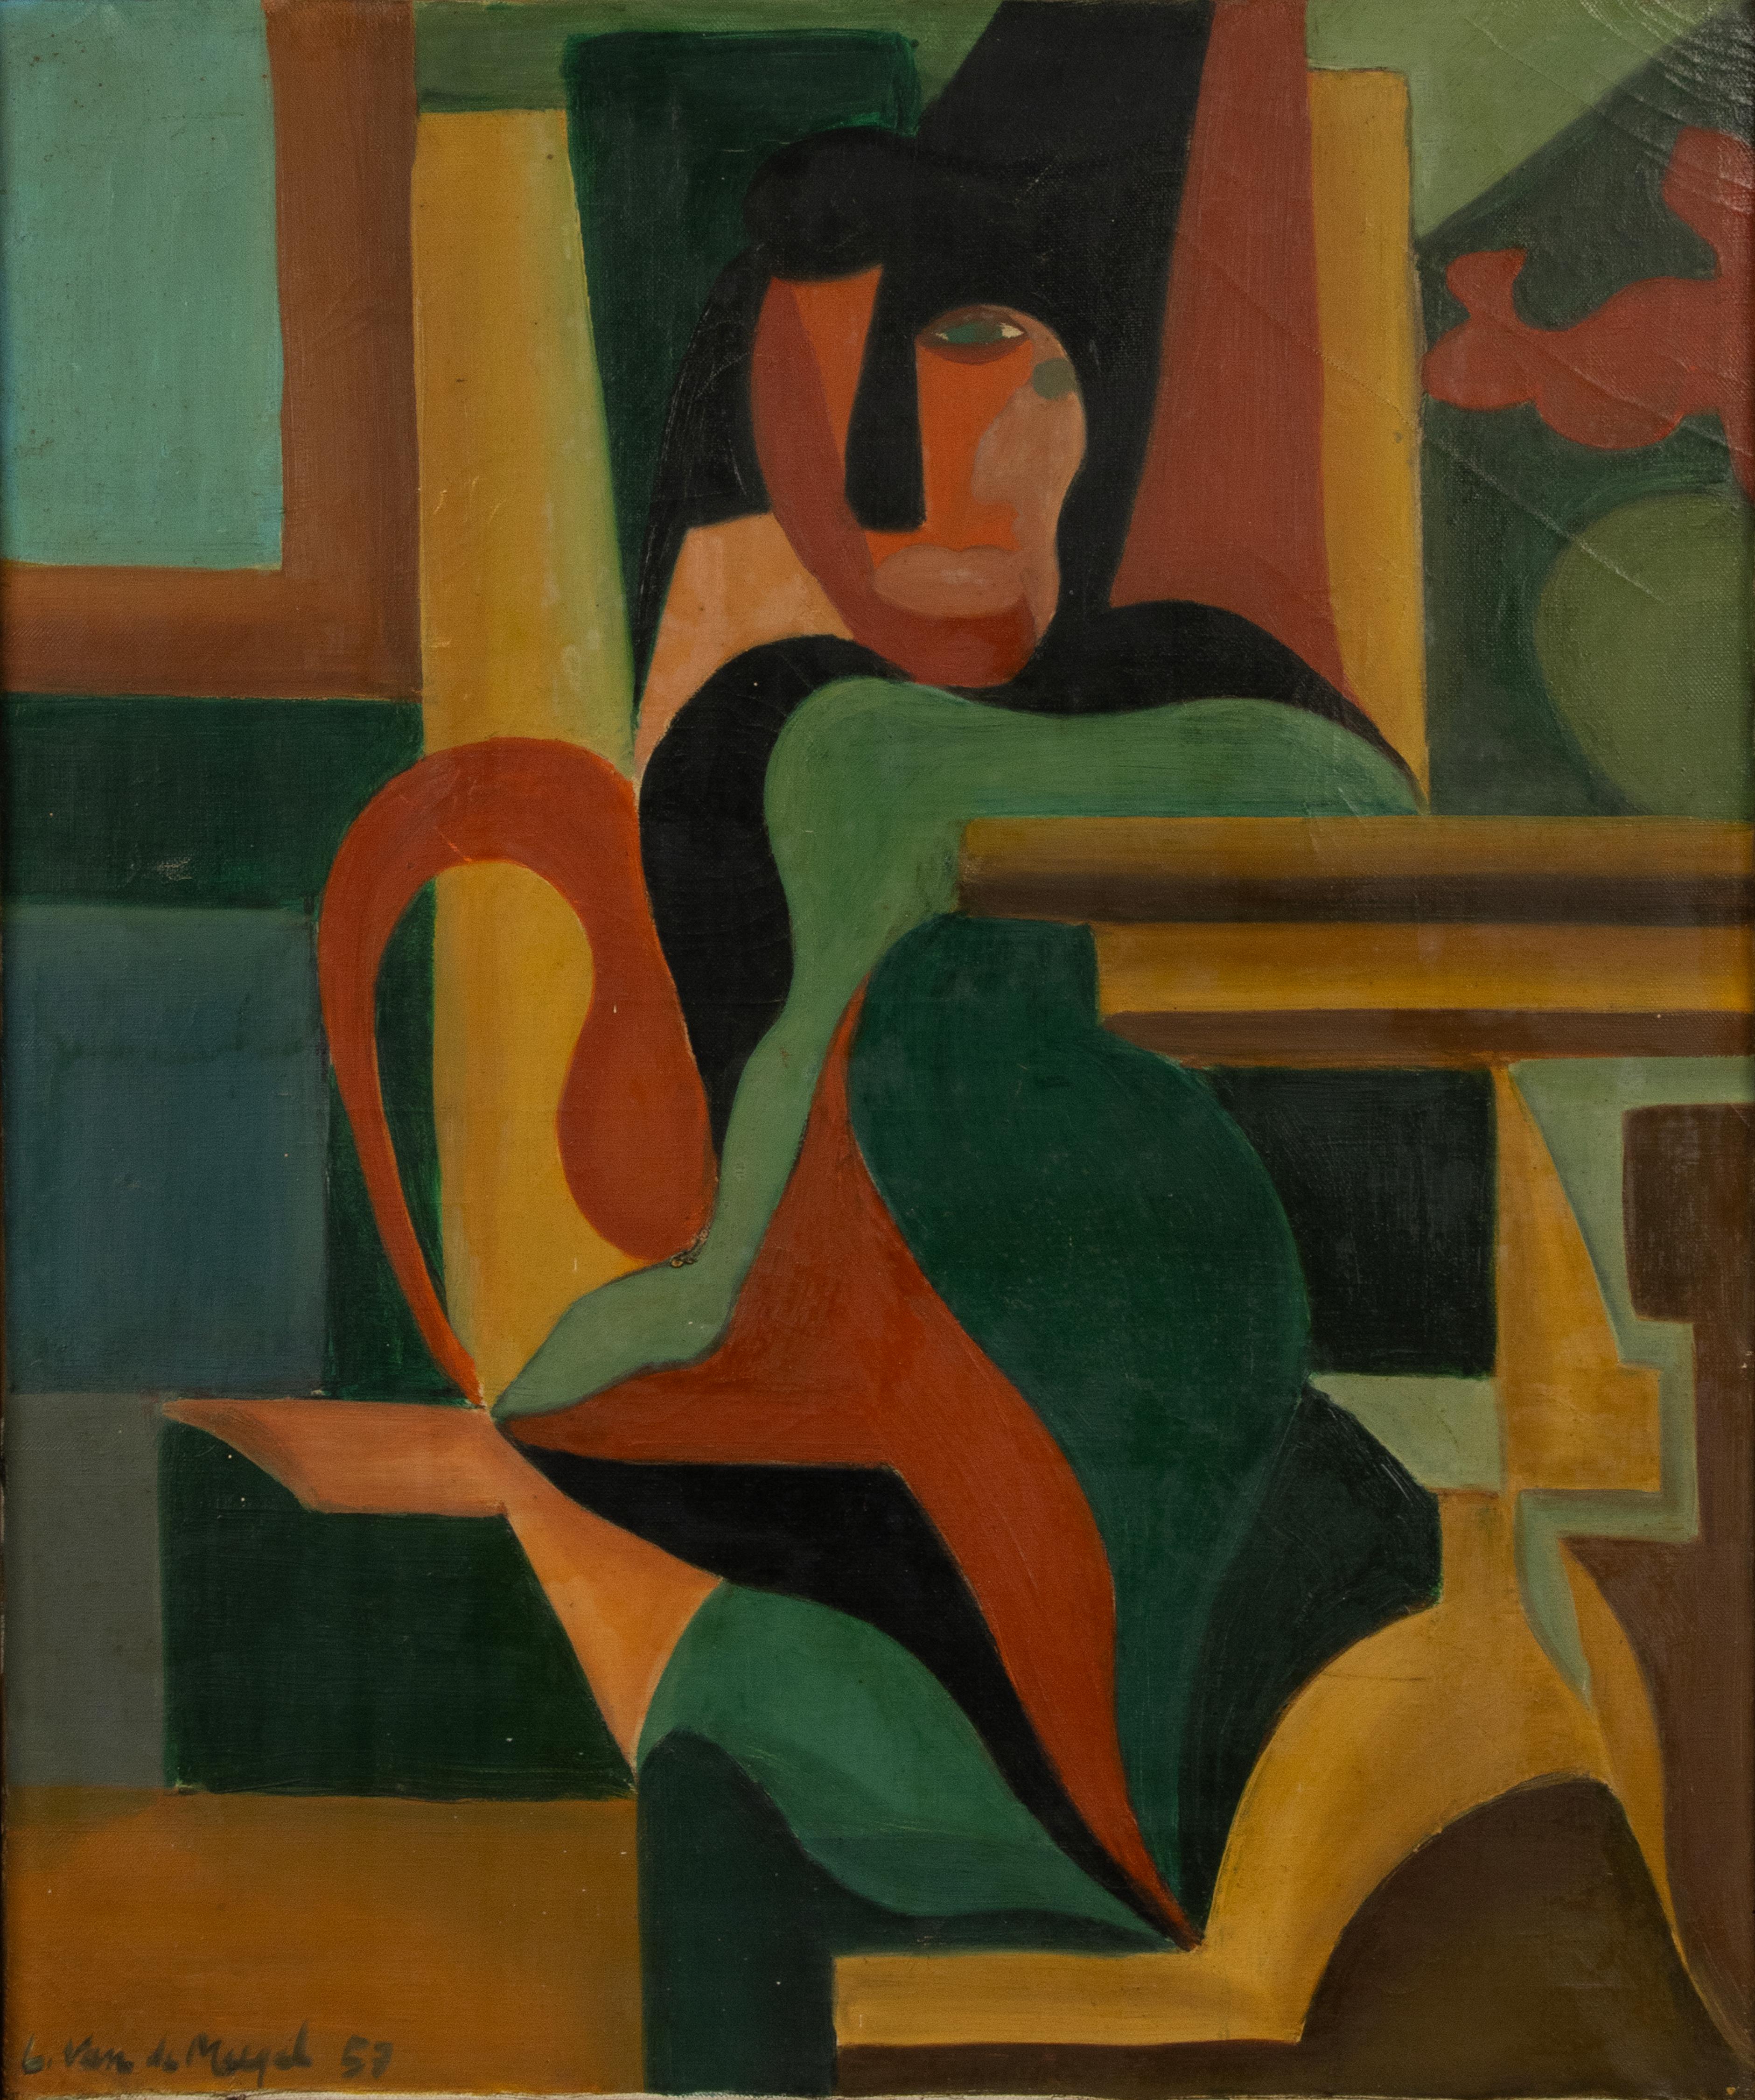 A beautiful modernist painting, an abstract interior representation of a lady at a side table. Oil paint on canvas.
The painting is signed and dated: Louis van Mergel 1957.
He is a Belgian painter, but there is hardly any information available about